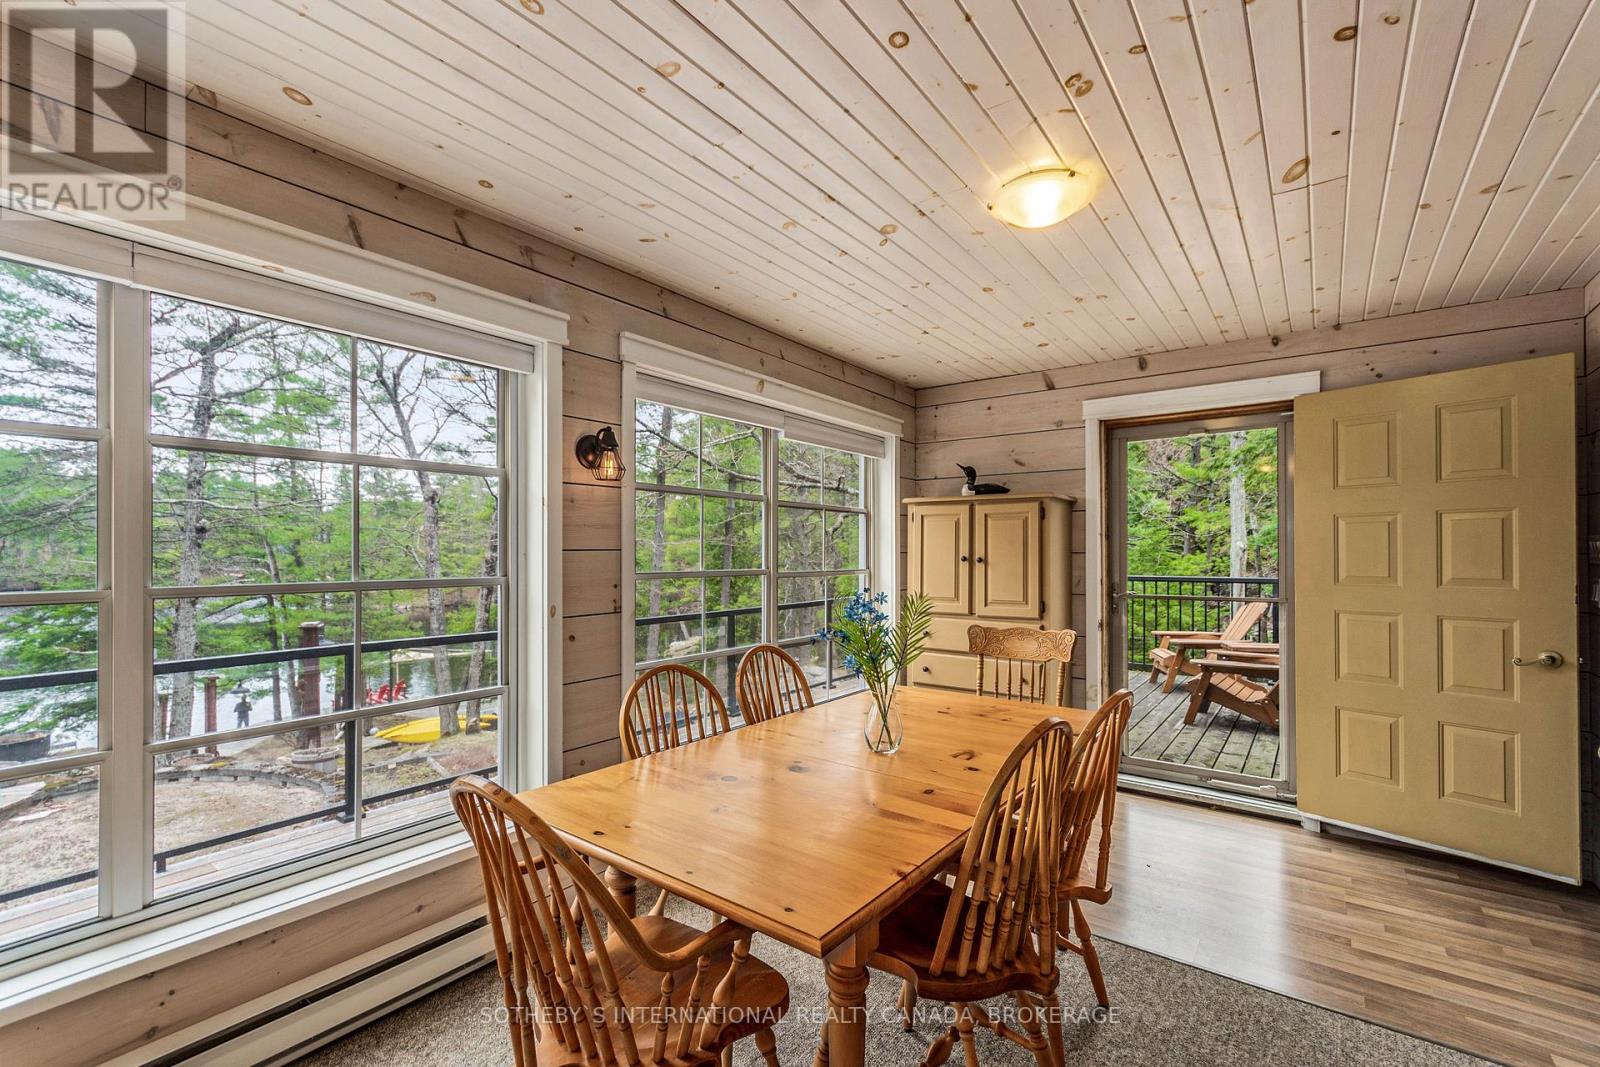 Photo 9 of listing located at 38 SR405 SEVERN RIVER